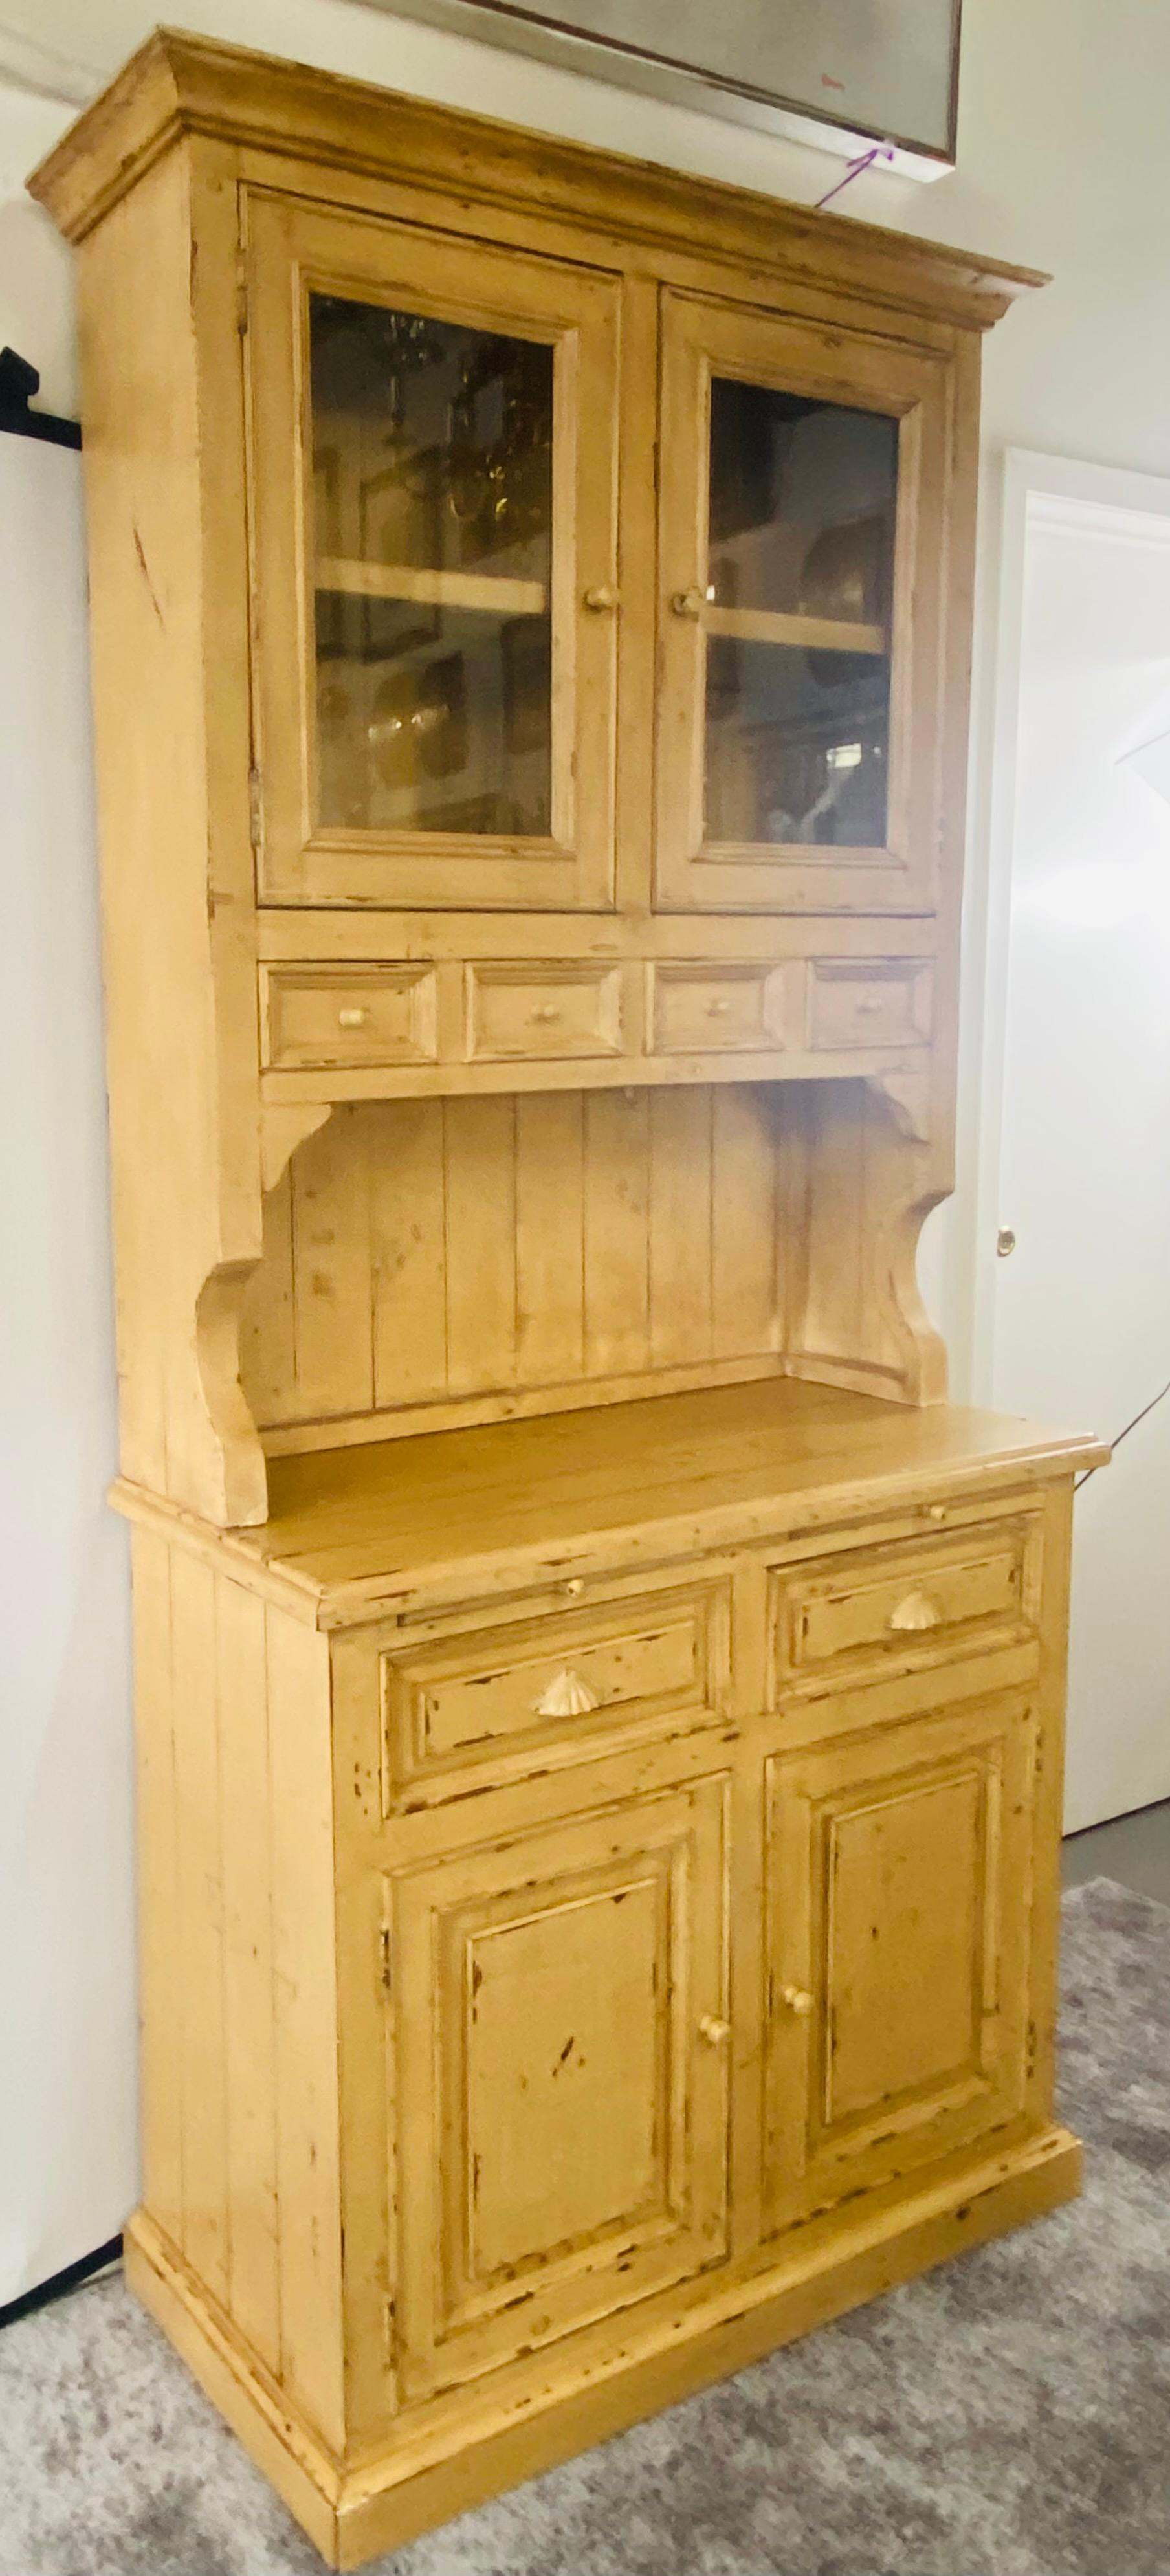 A stylish and timeless antique off-white/ beige French farm style cabinet with hutch in distressed look. The cabinet comes in two pieces. The upper piece features two glass door with shelves and four small drawers with dovetails joints. The bottom